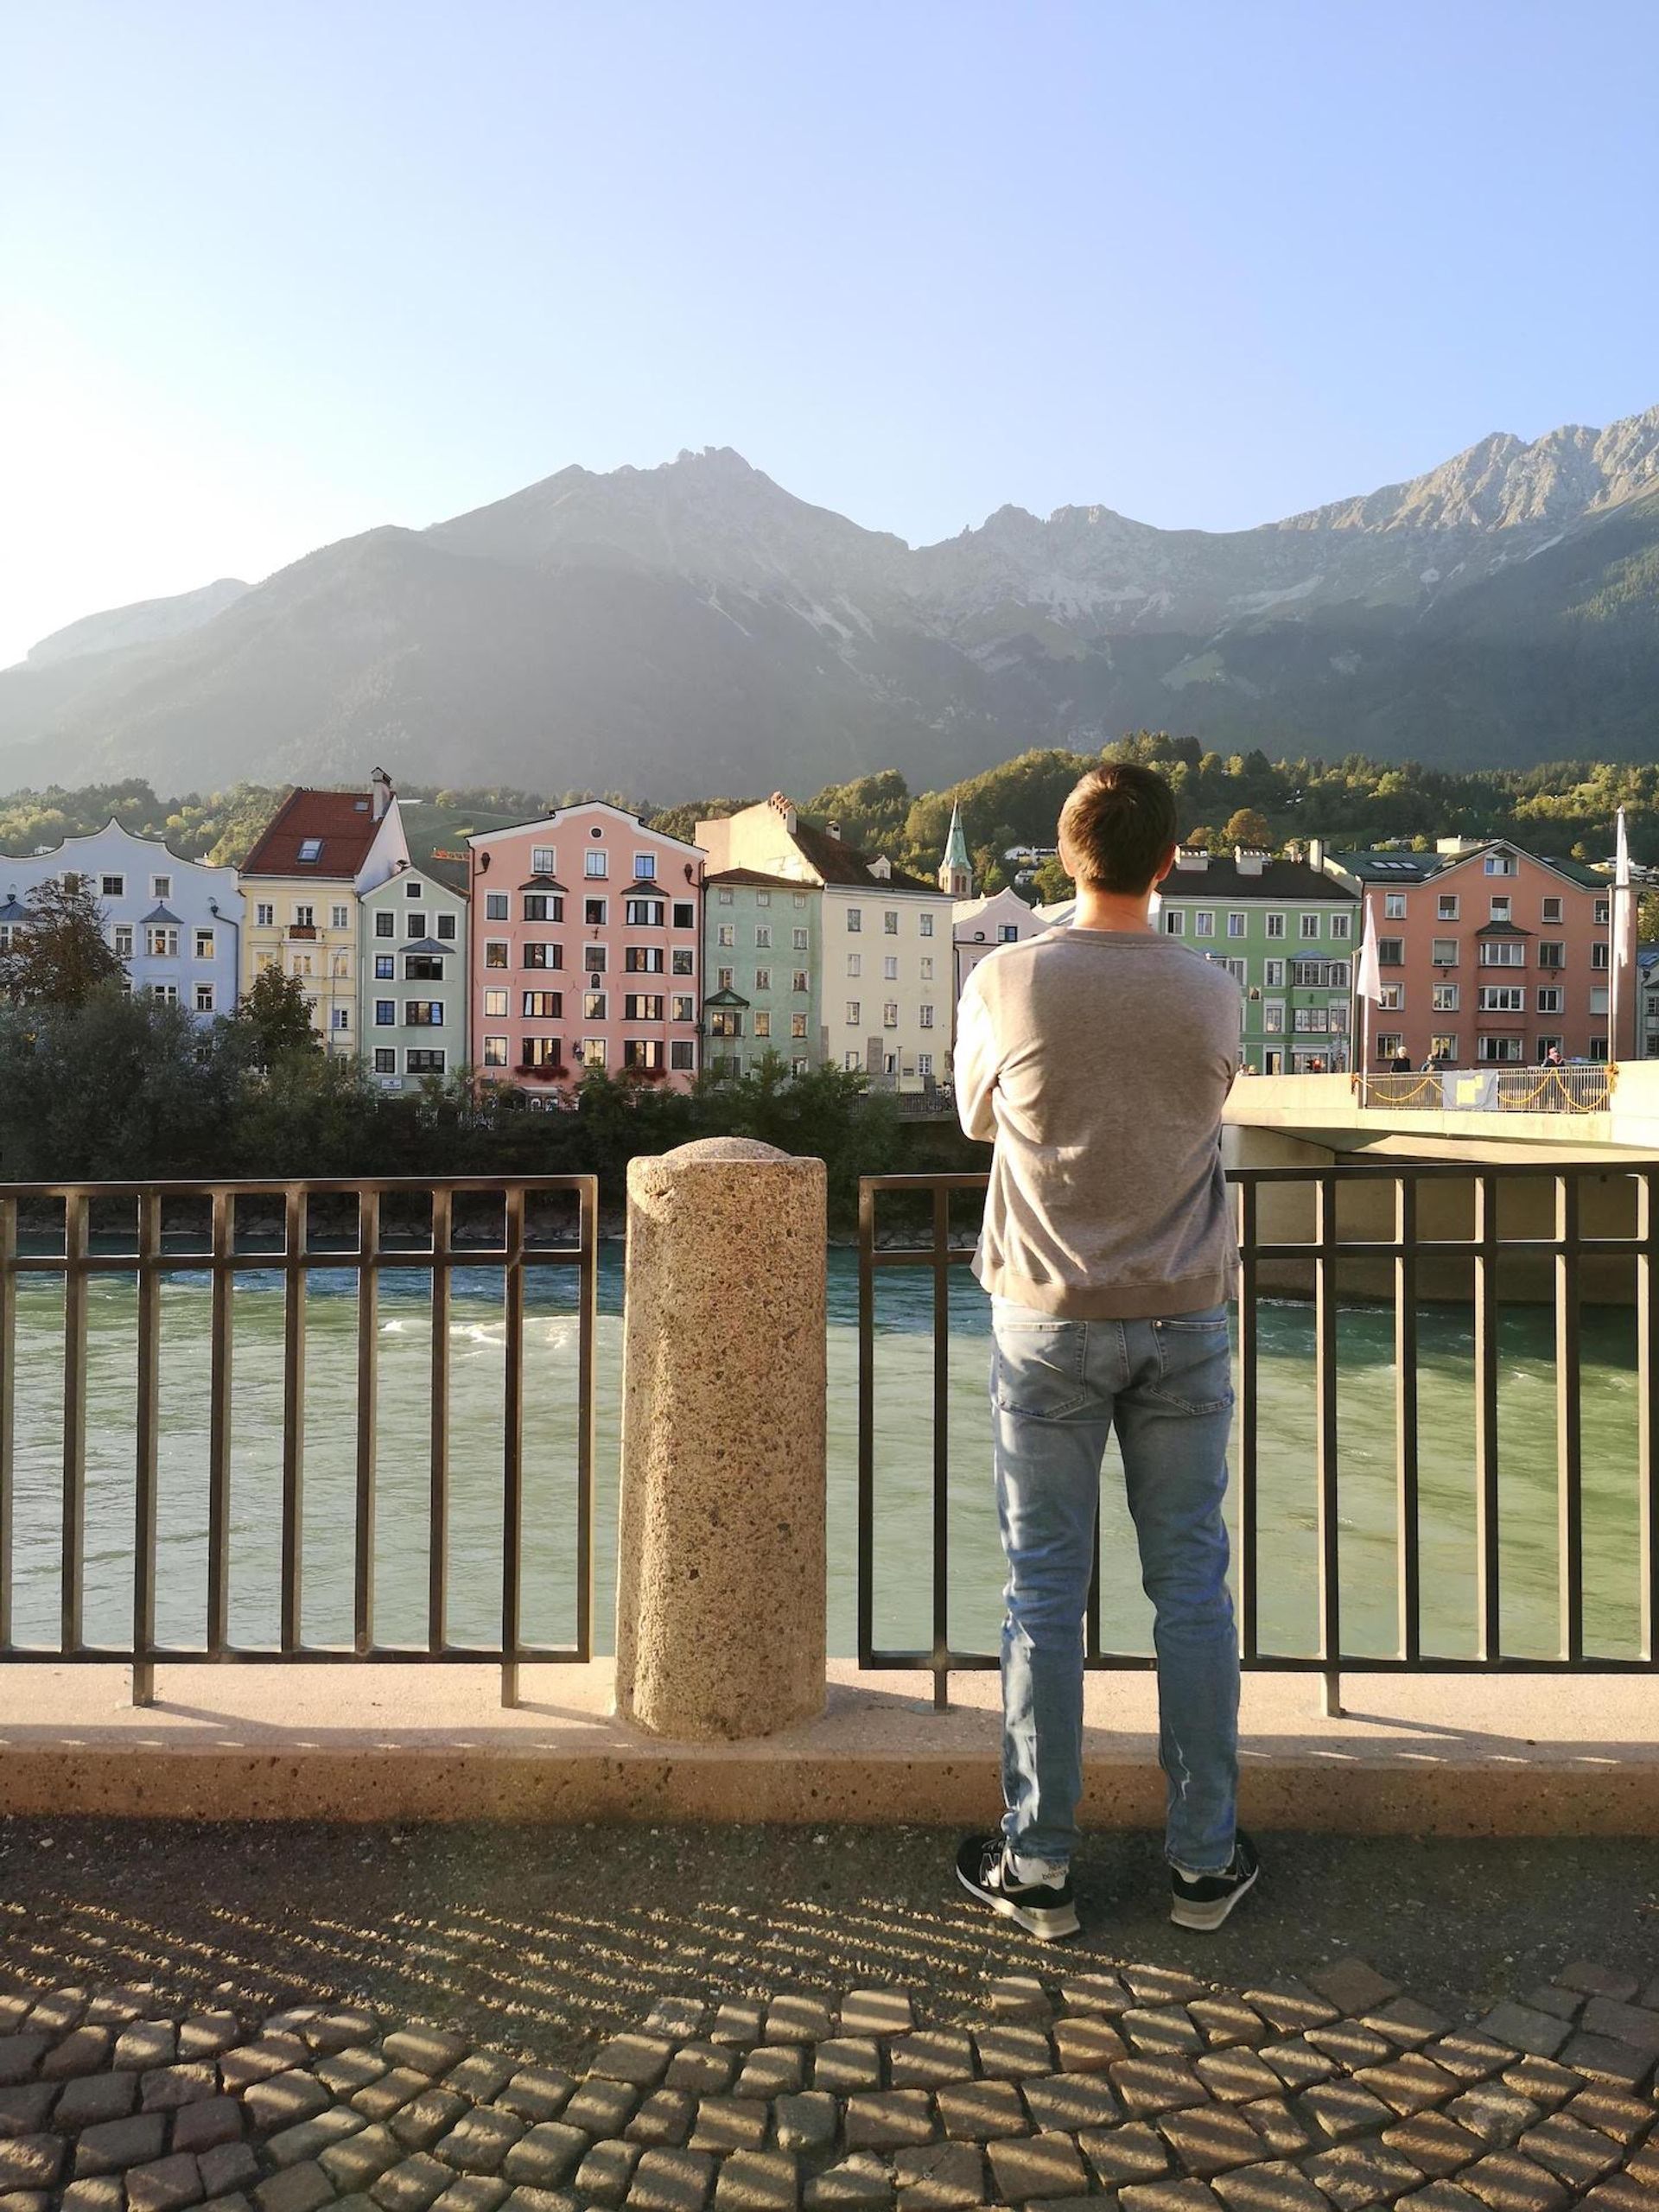 Mountains and houses, person standing in front of them